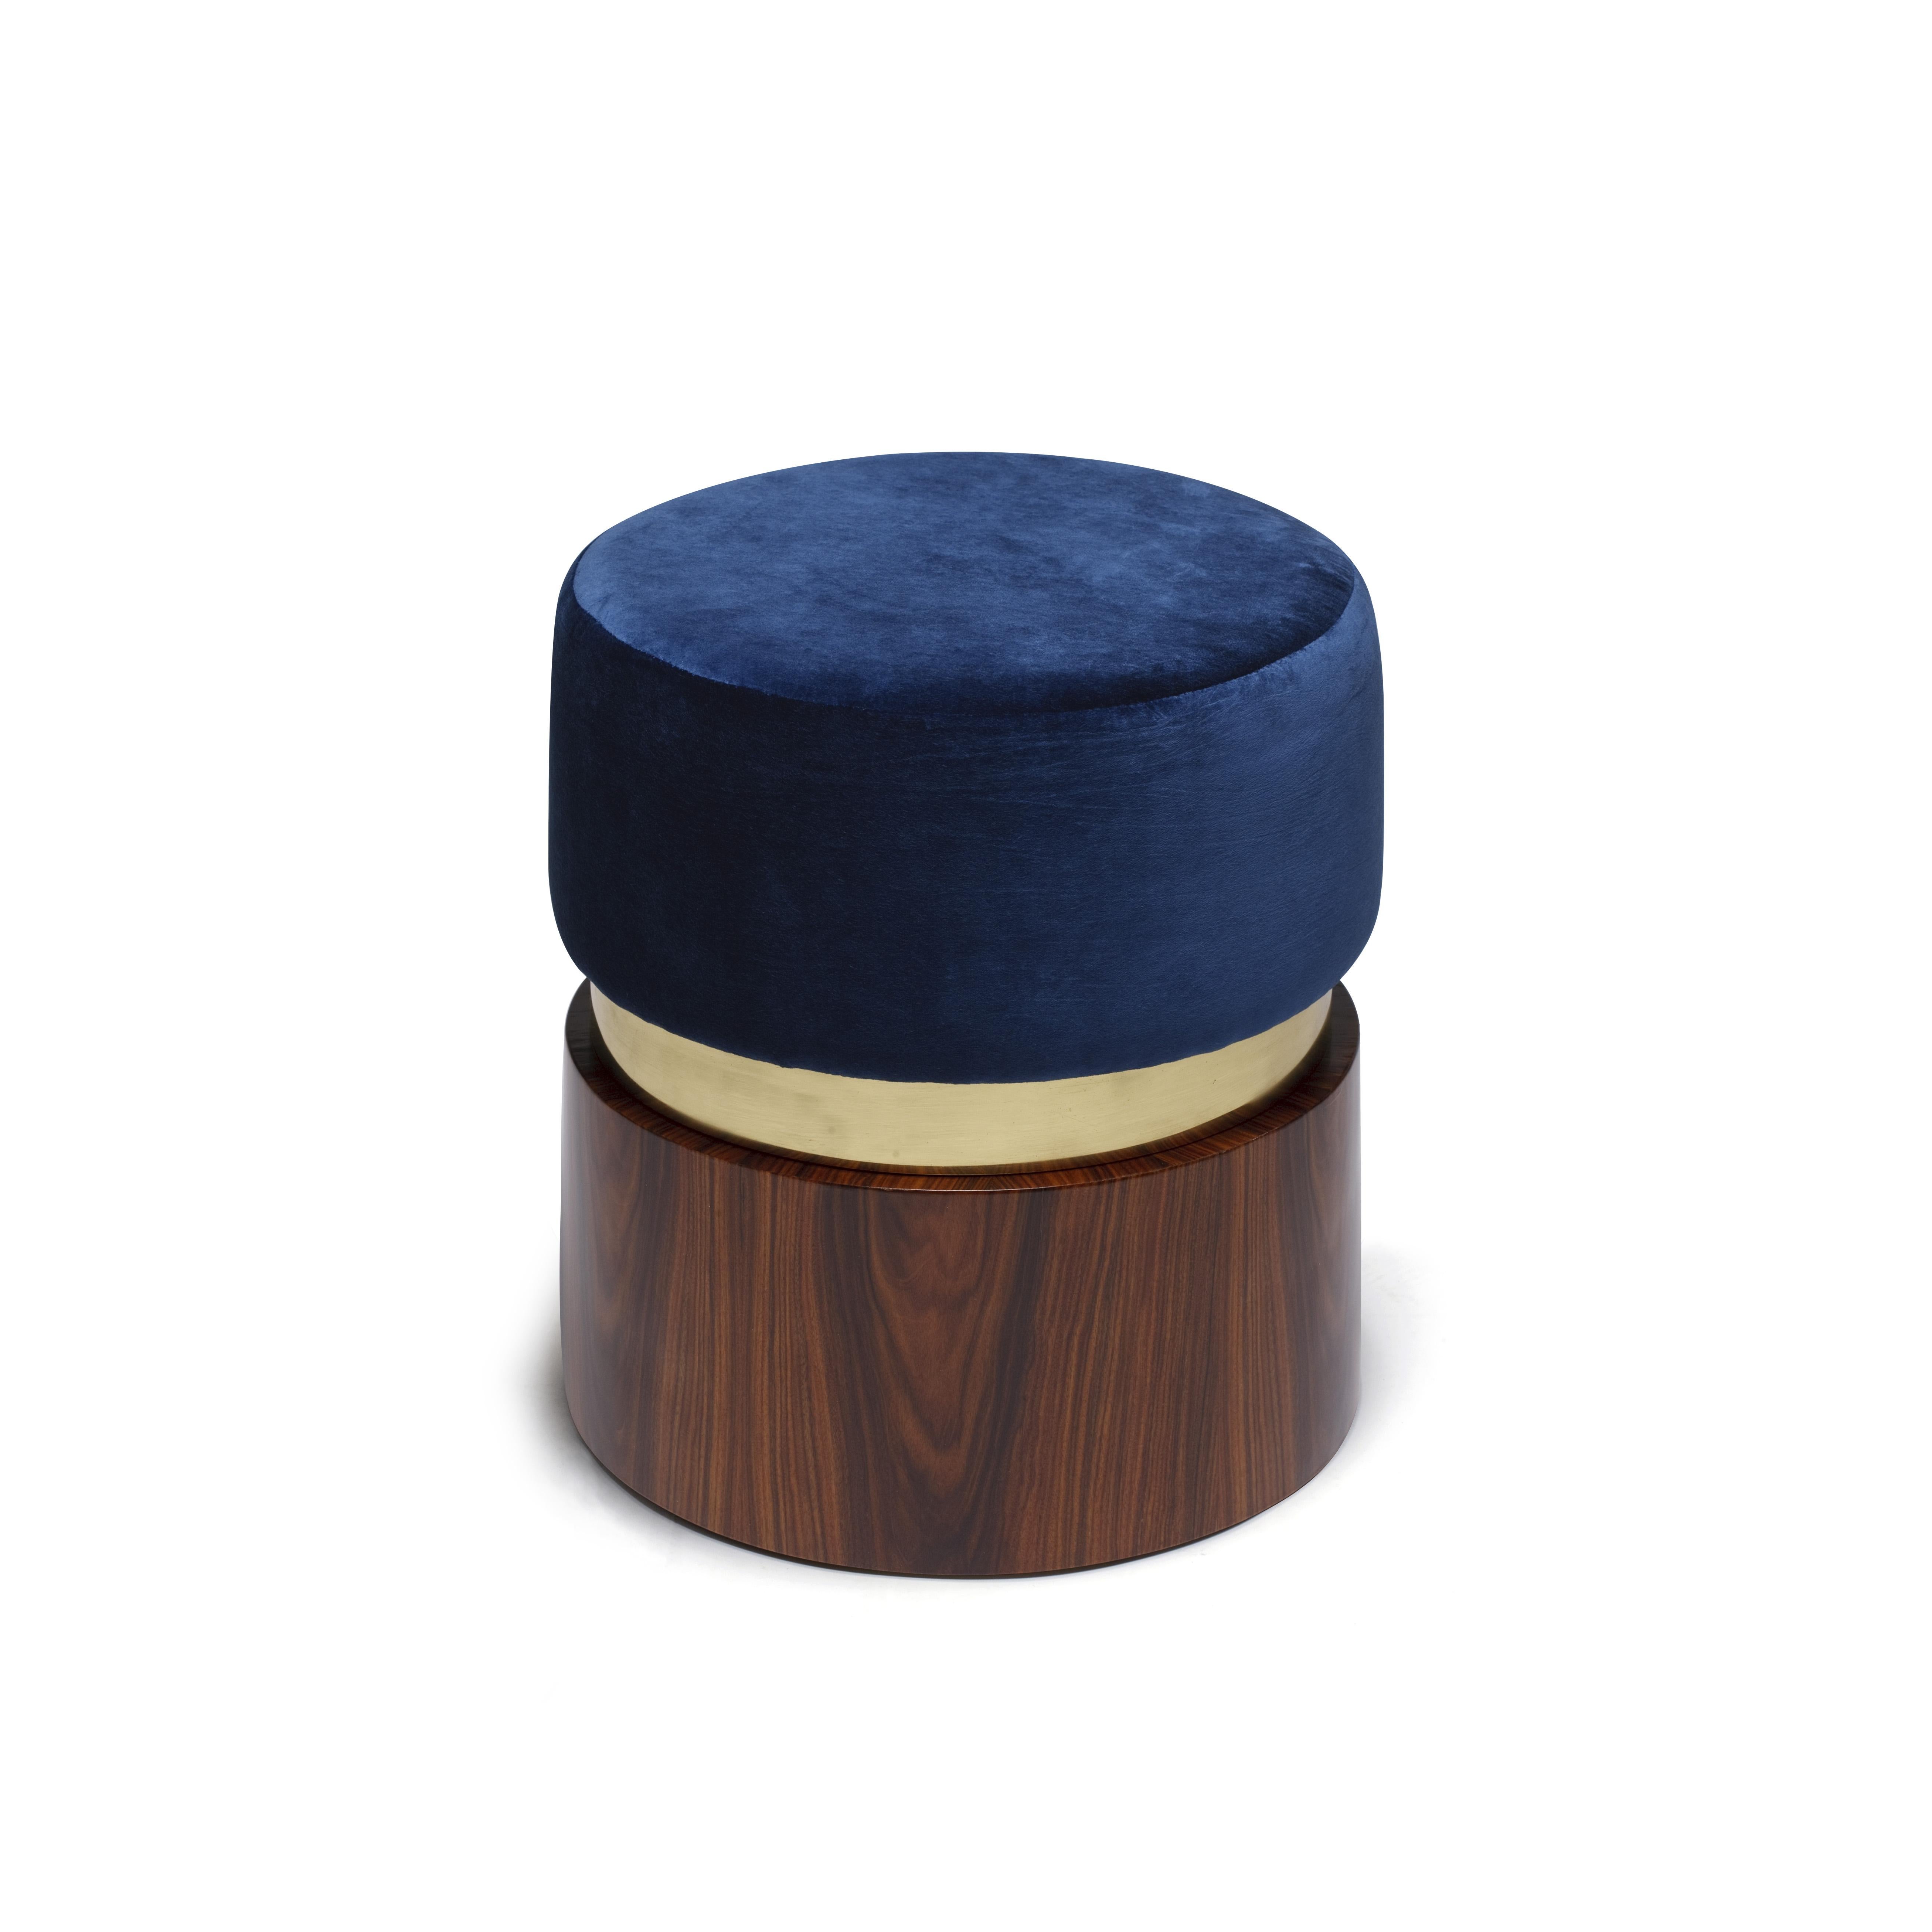 Lune B Stool, in Ironwood and Polished Brass, Handcrafted in Portugal by Duistt

LUNE B stool, crafted with great attention to details, is a very beautiful and versatile piece, which can be used as a stool or, if you put the wood tray on it, as a